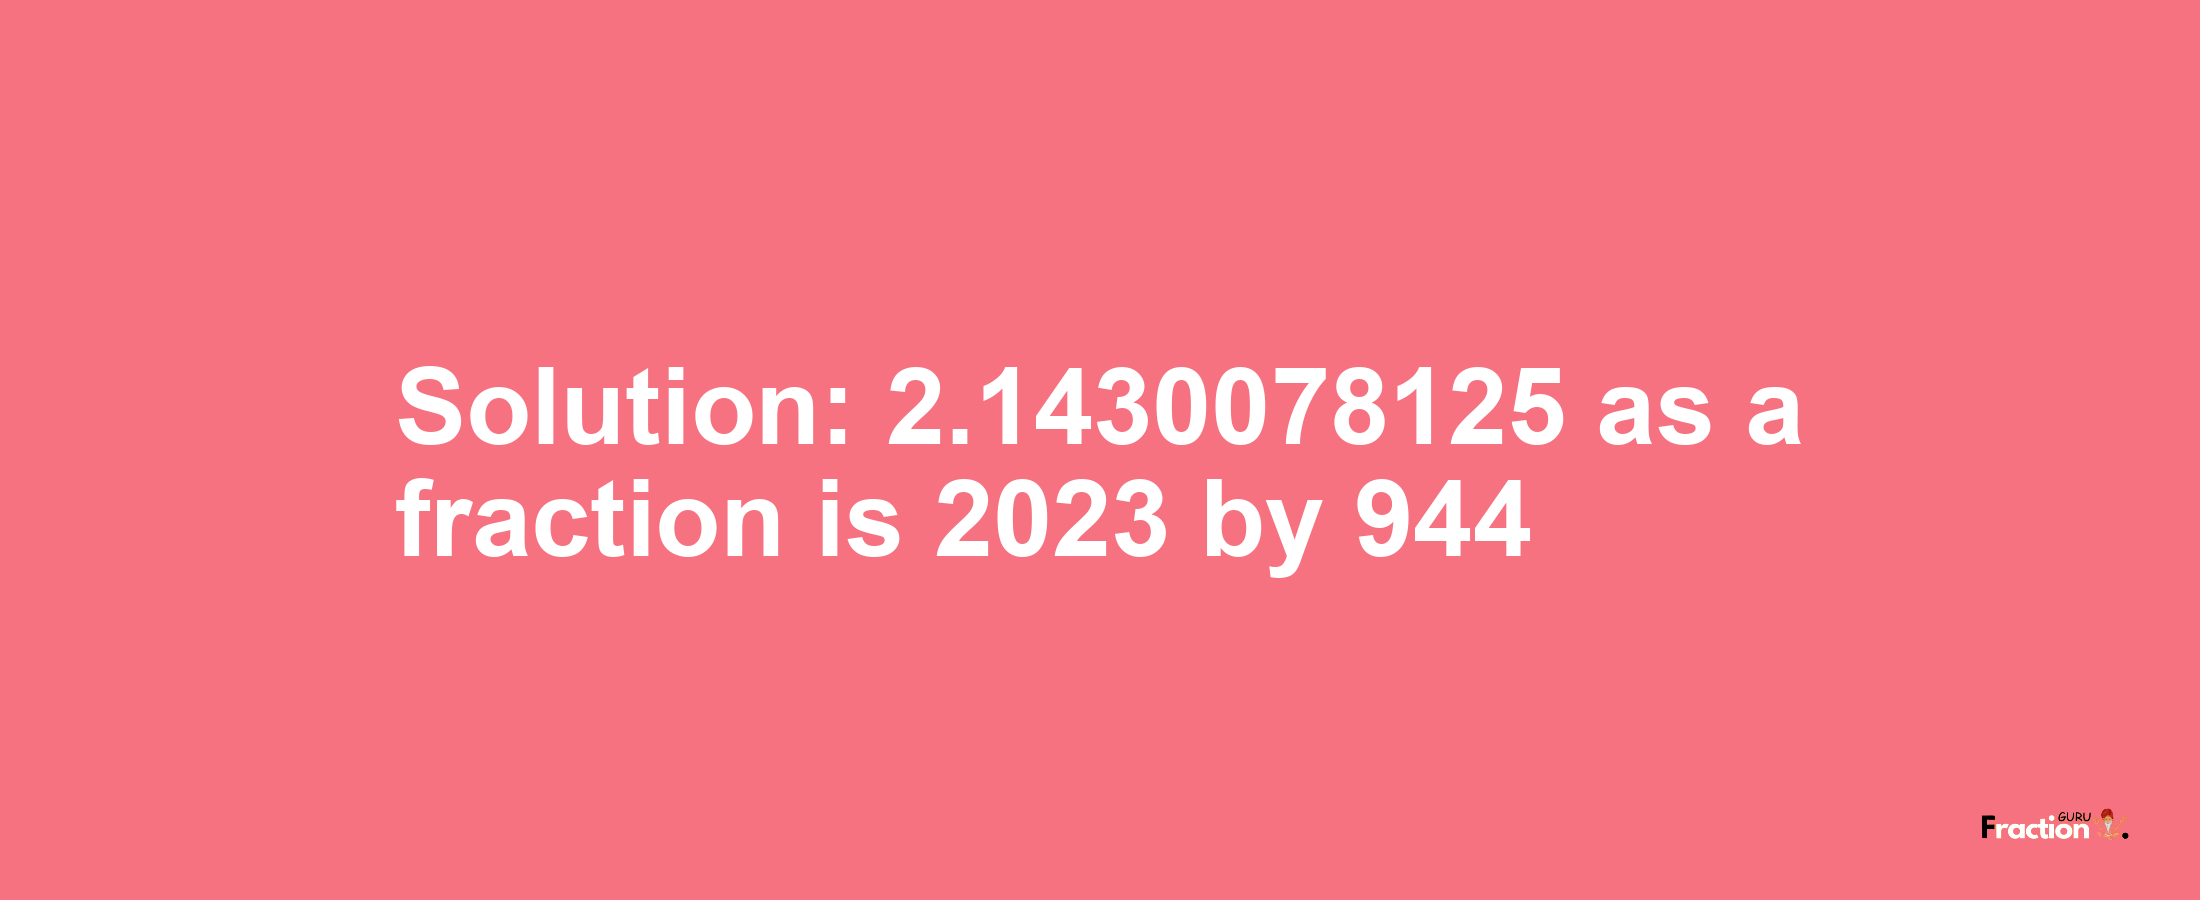 Solution:2.1430078125 as a fraction is 2023/944